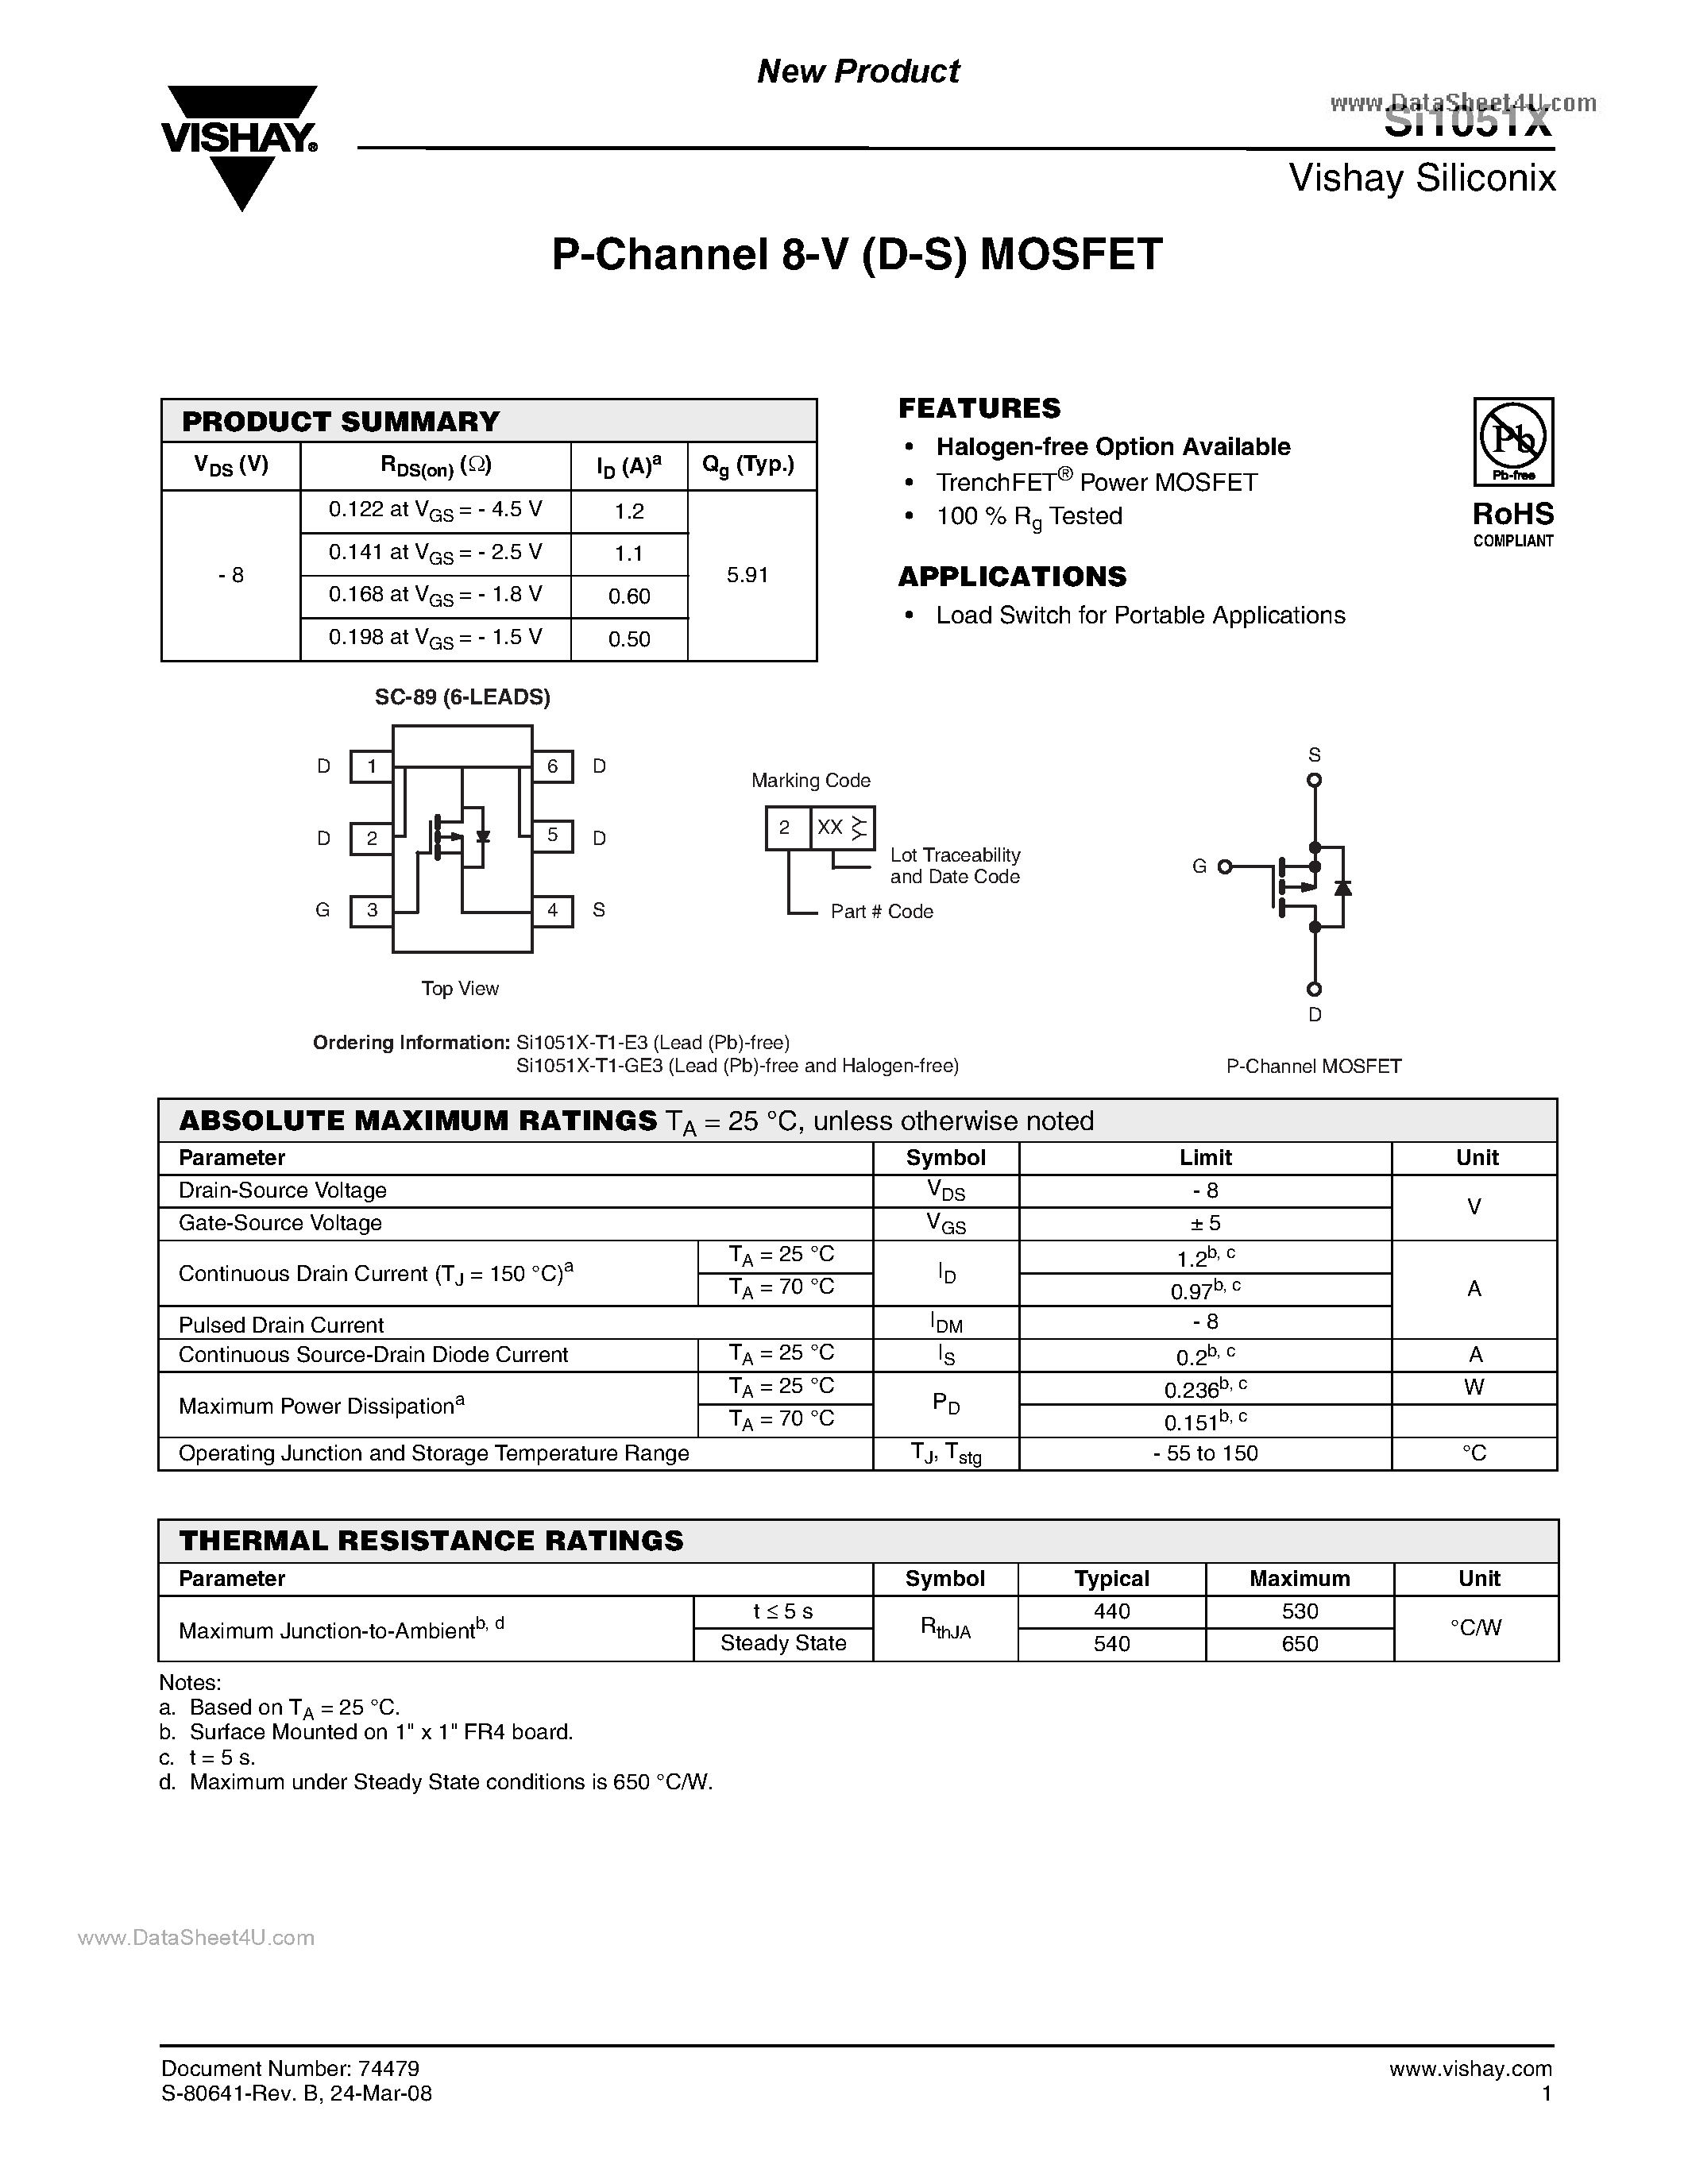 Datasheet SI1051X - P-Channel 8-V (D-S) MOSFET page 1